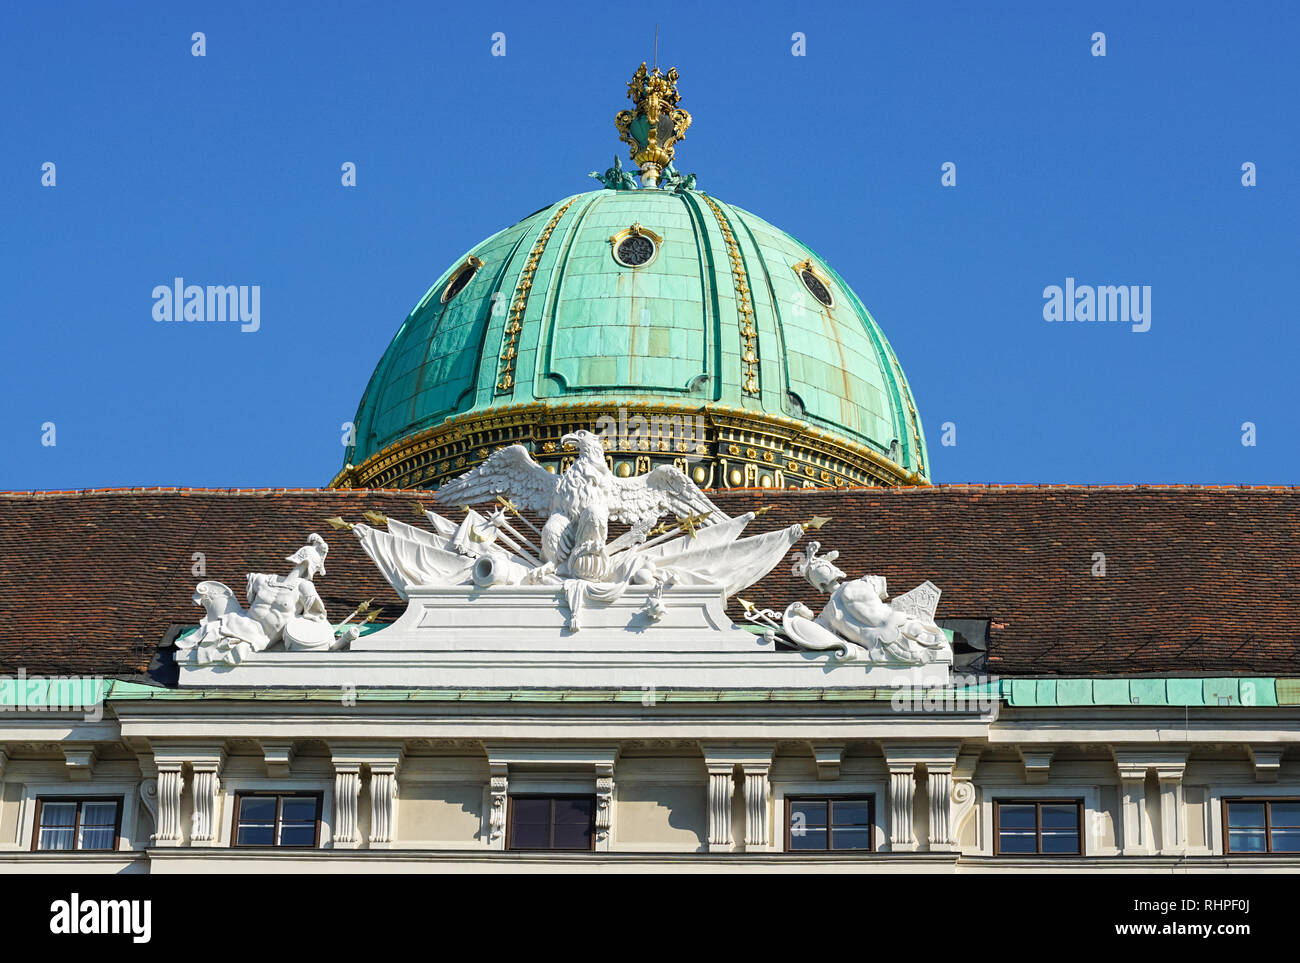 Dome of the Imperial Chancellery Wing (Reichskanzleitrakt), Hofburg palace in Vienna, Austria Stock Photo